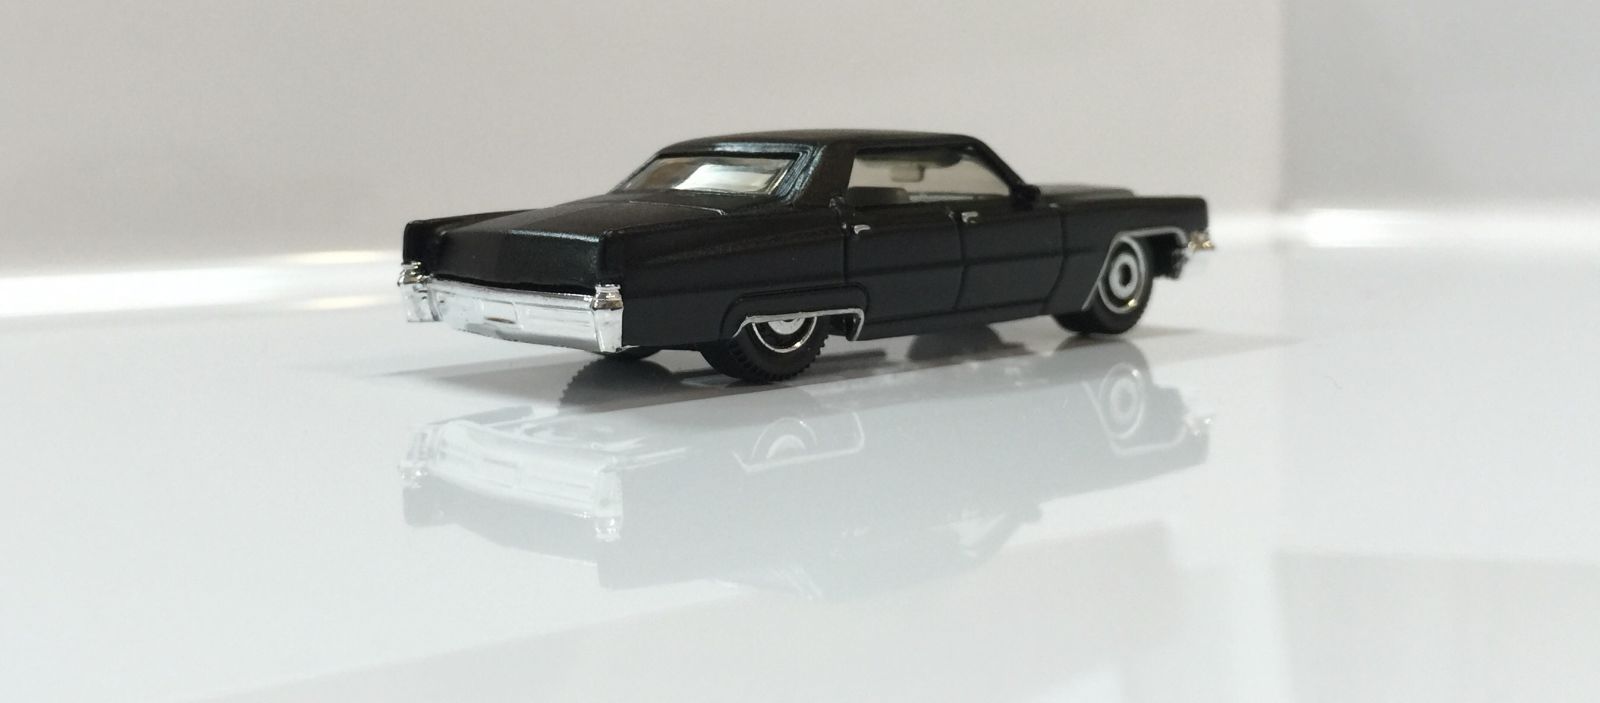 Illustration for article titled [Custom] 1969 Cadillac